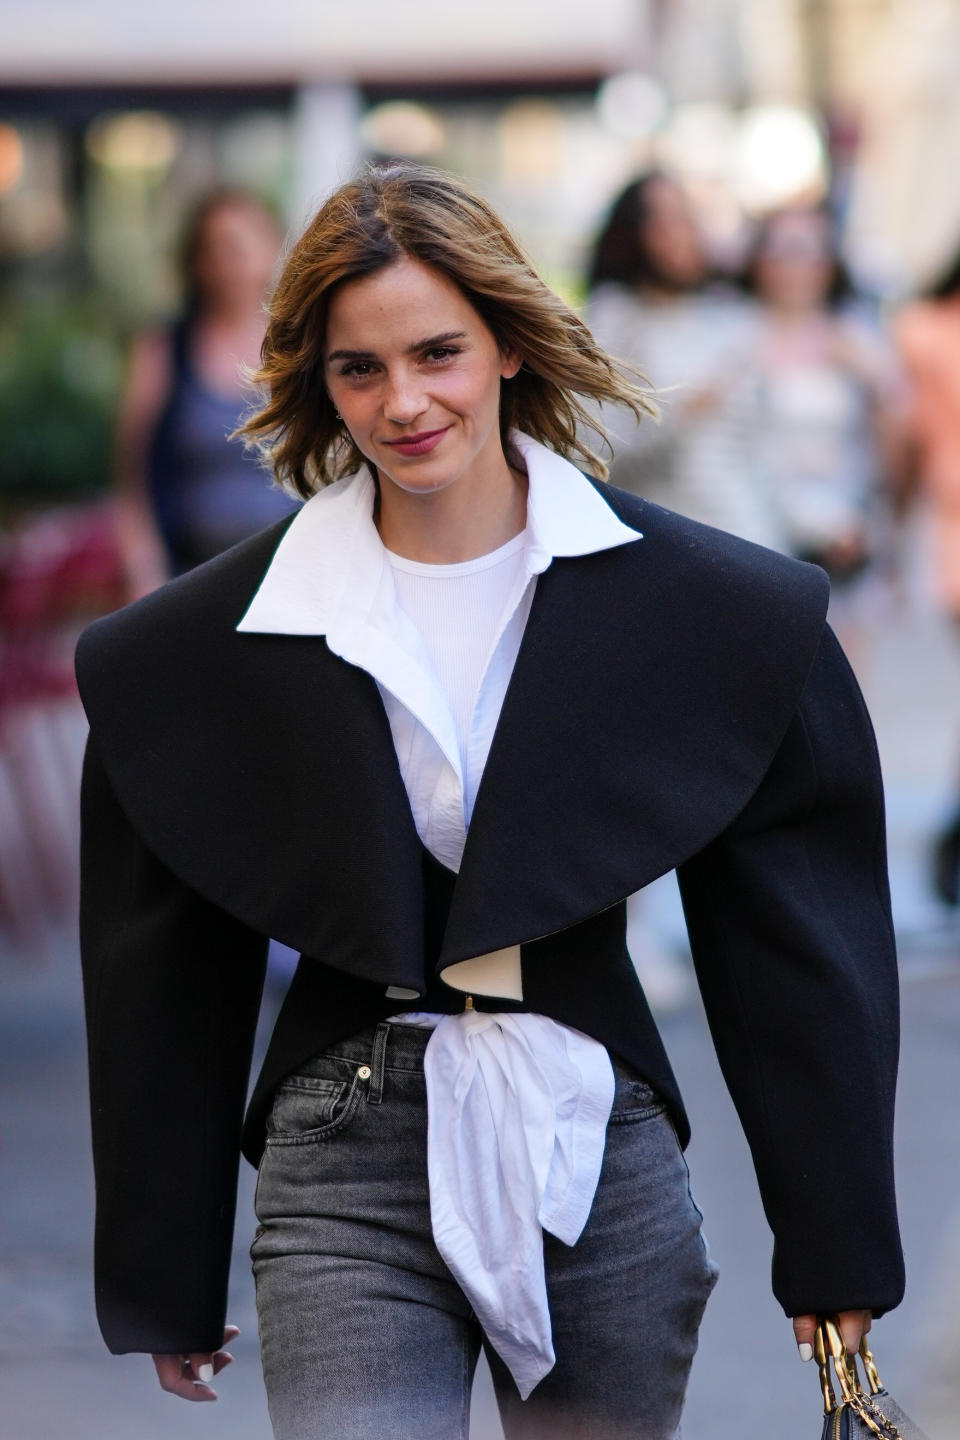 Emma Watson during Paris Fashion Week, Haute Couture in 2022. (Getty Images)